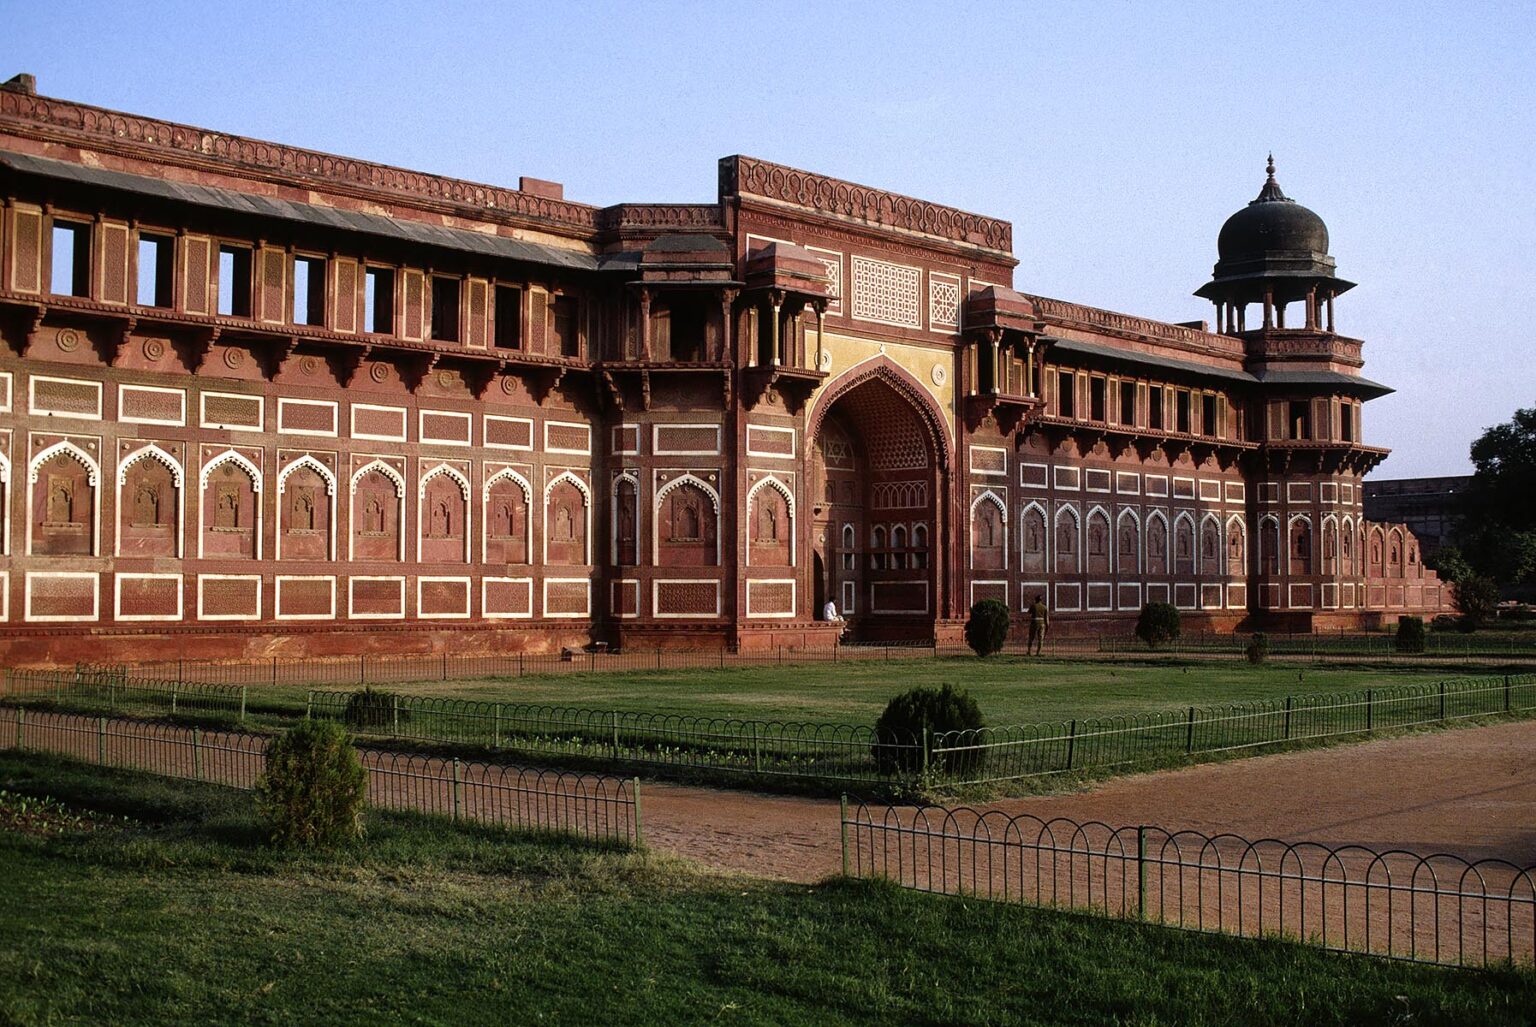 The entrance to AGRA FORT, built by the Mughal emperors in the 1500's - AGRA, INDIA